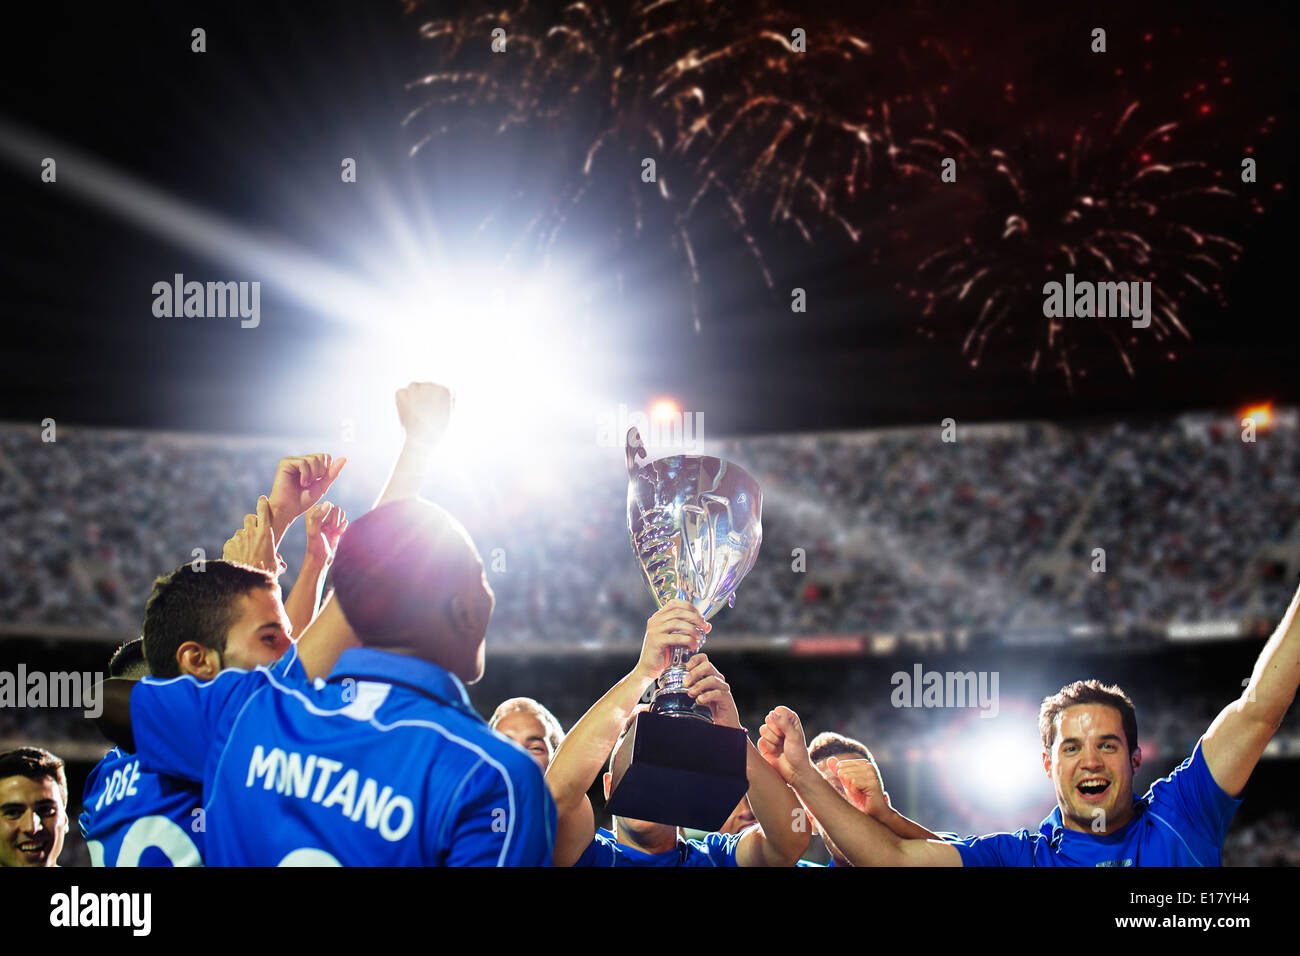 Soccer team celebrating with trophy on field Stock Photo